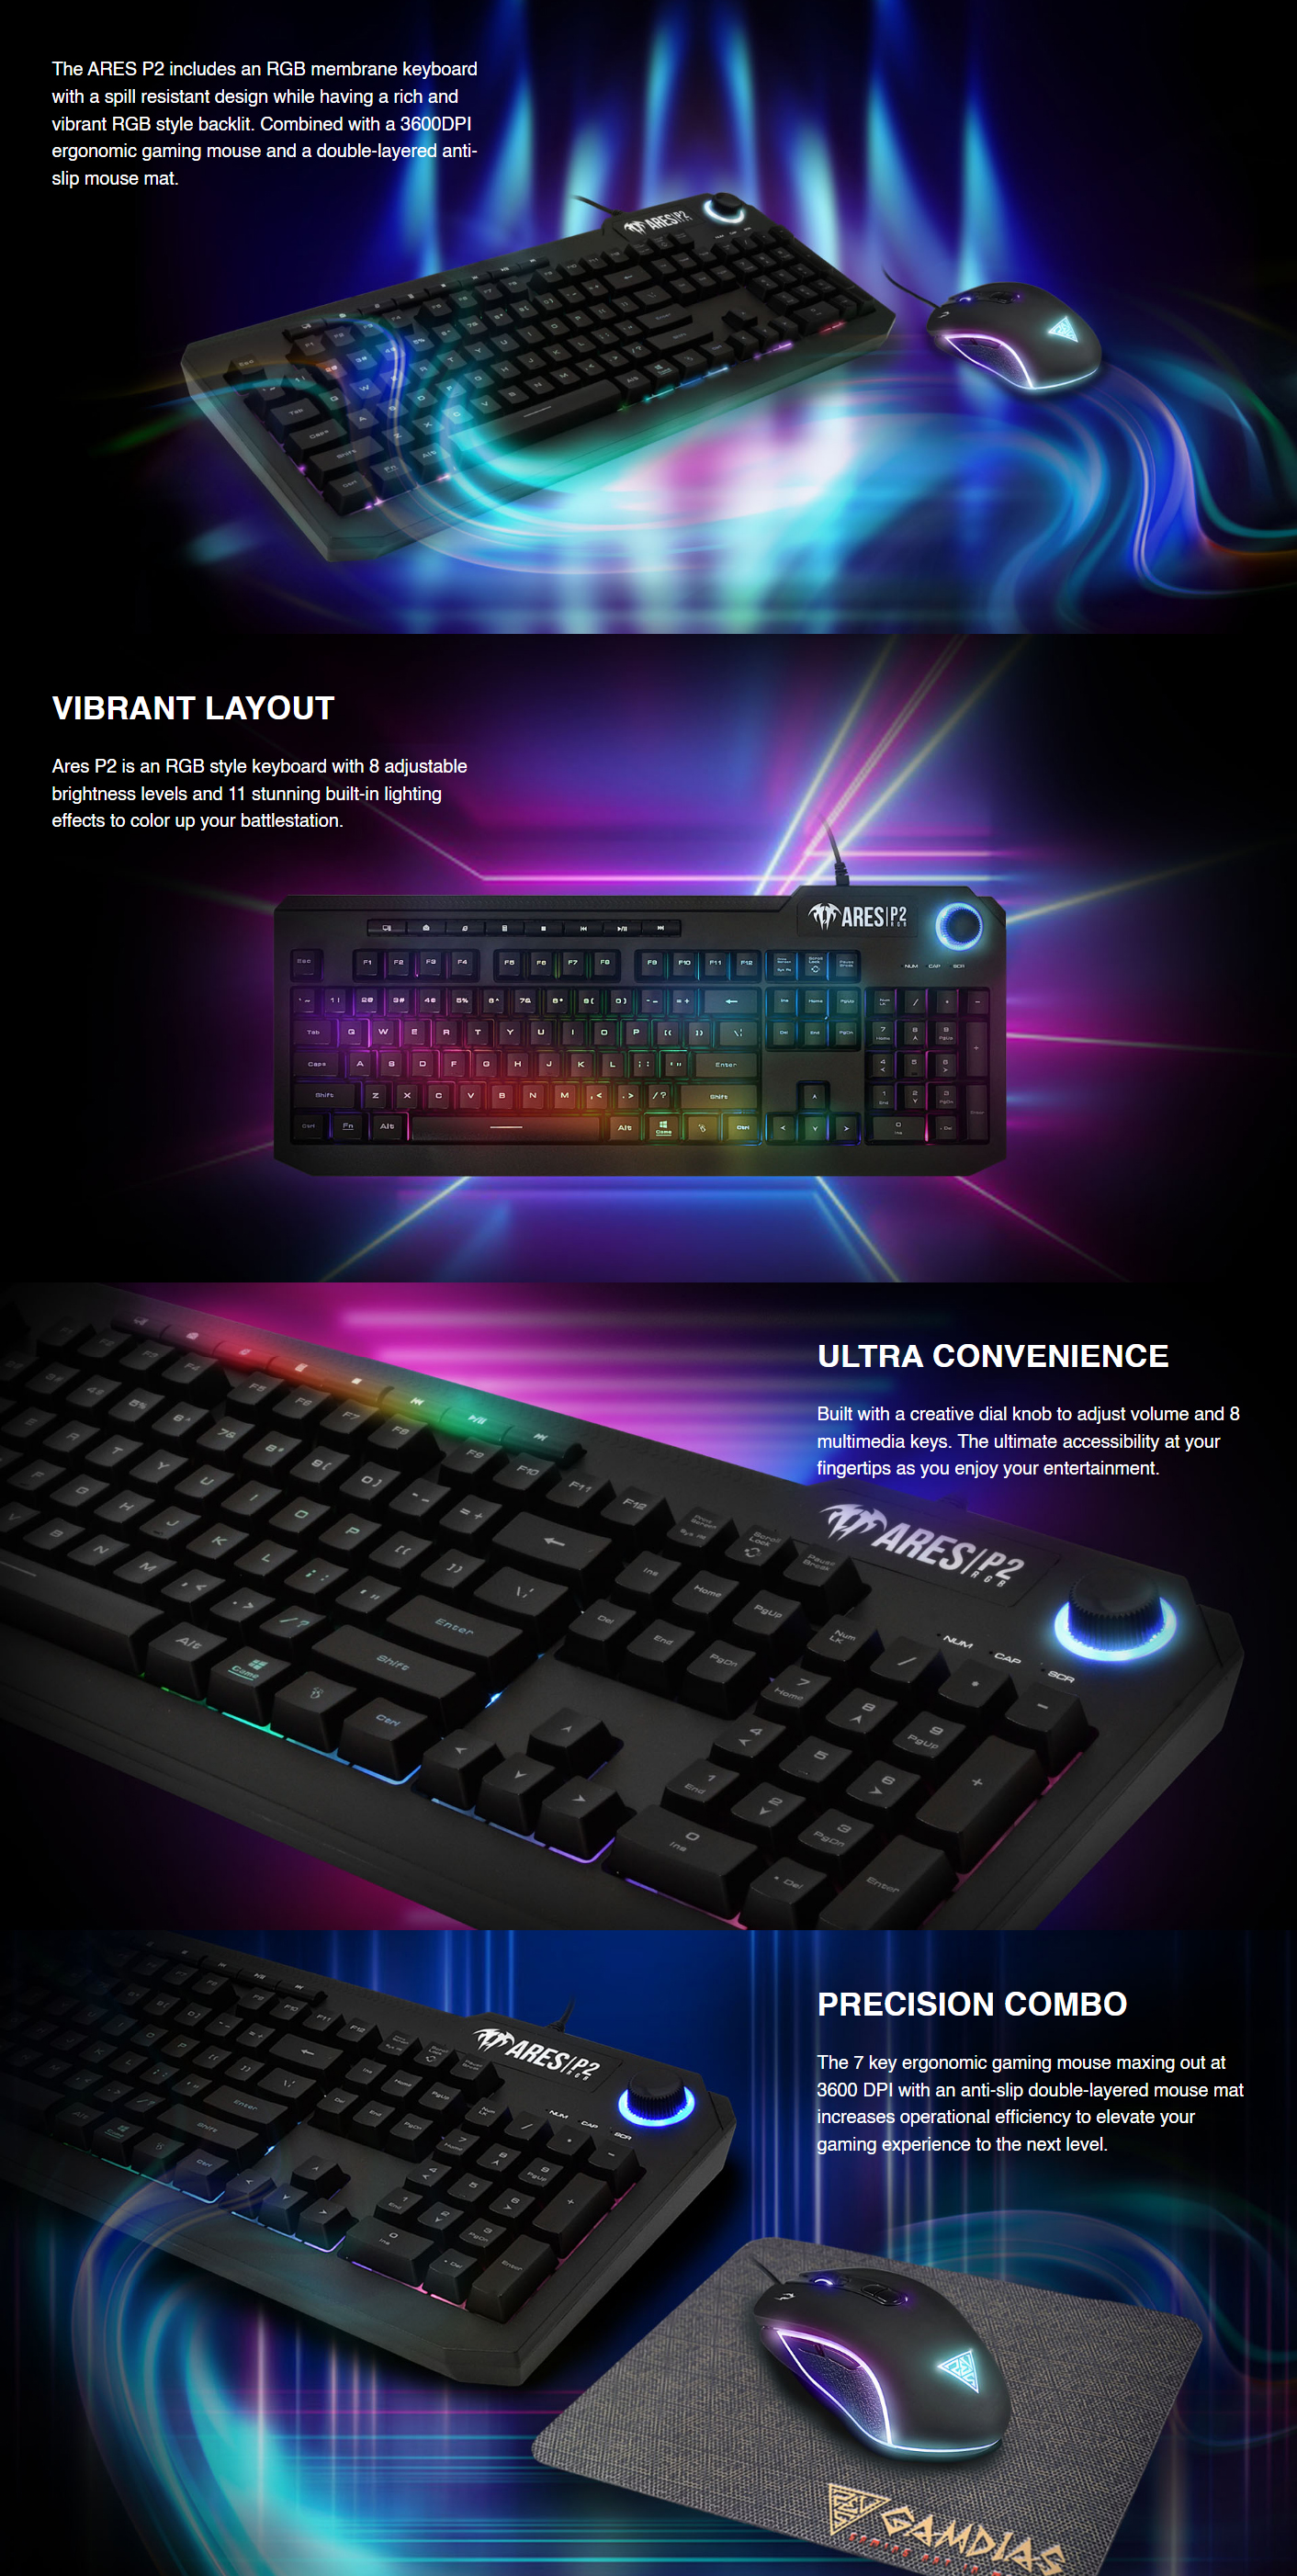 Keyboards-Gamdias-Ares-P2-RGB-3-in-1-Gaming-Keyboard-and-Mouse-Combo-2